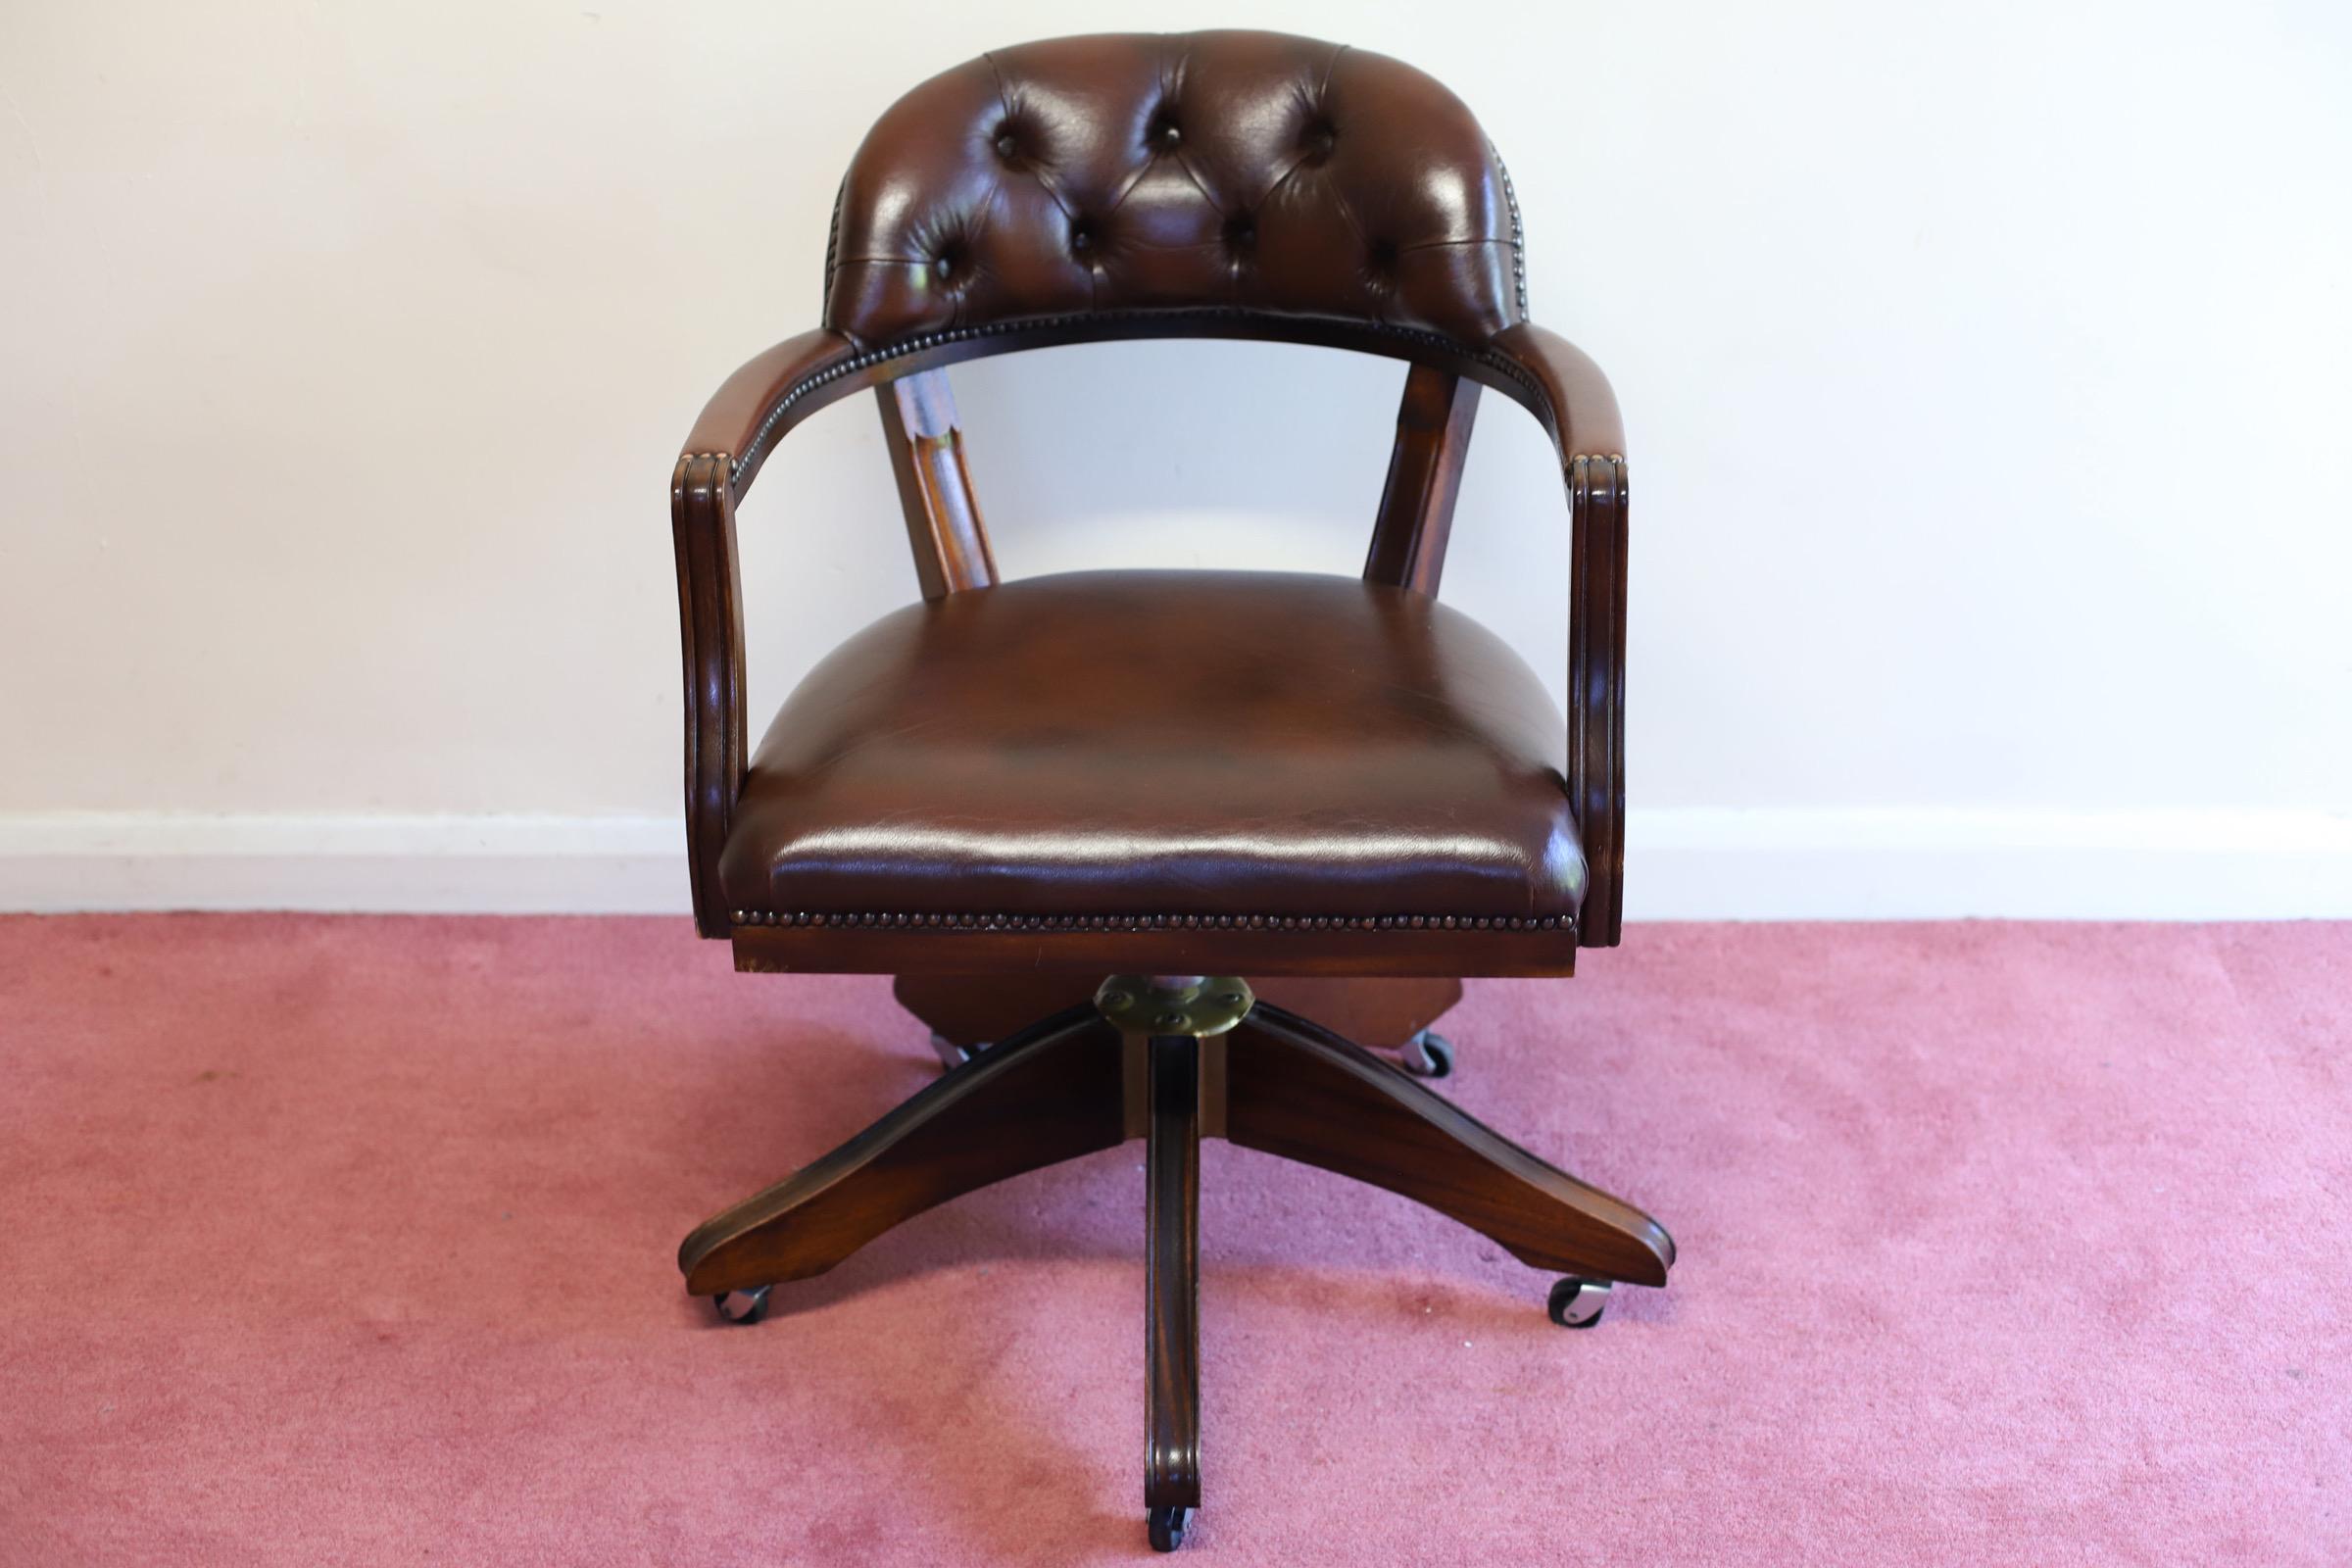 We are delighted to offer for sell this stunning Cushioned Chesterfield Captain Leather Chair.
This chair is in lightly restored condition, we have deep cleaned hand condition waxed and hand polished it from top to bottom, the leather has a stunning